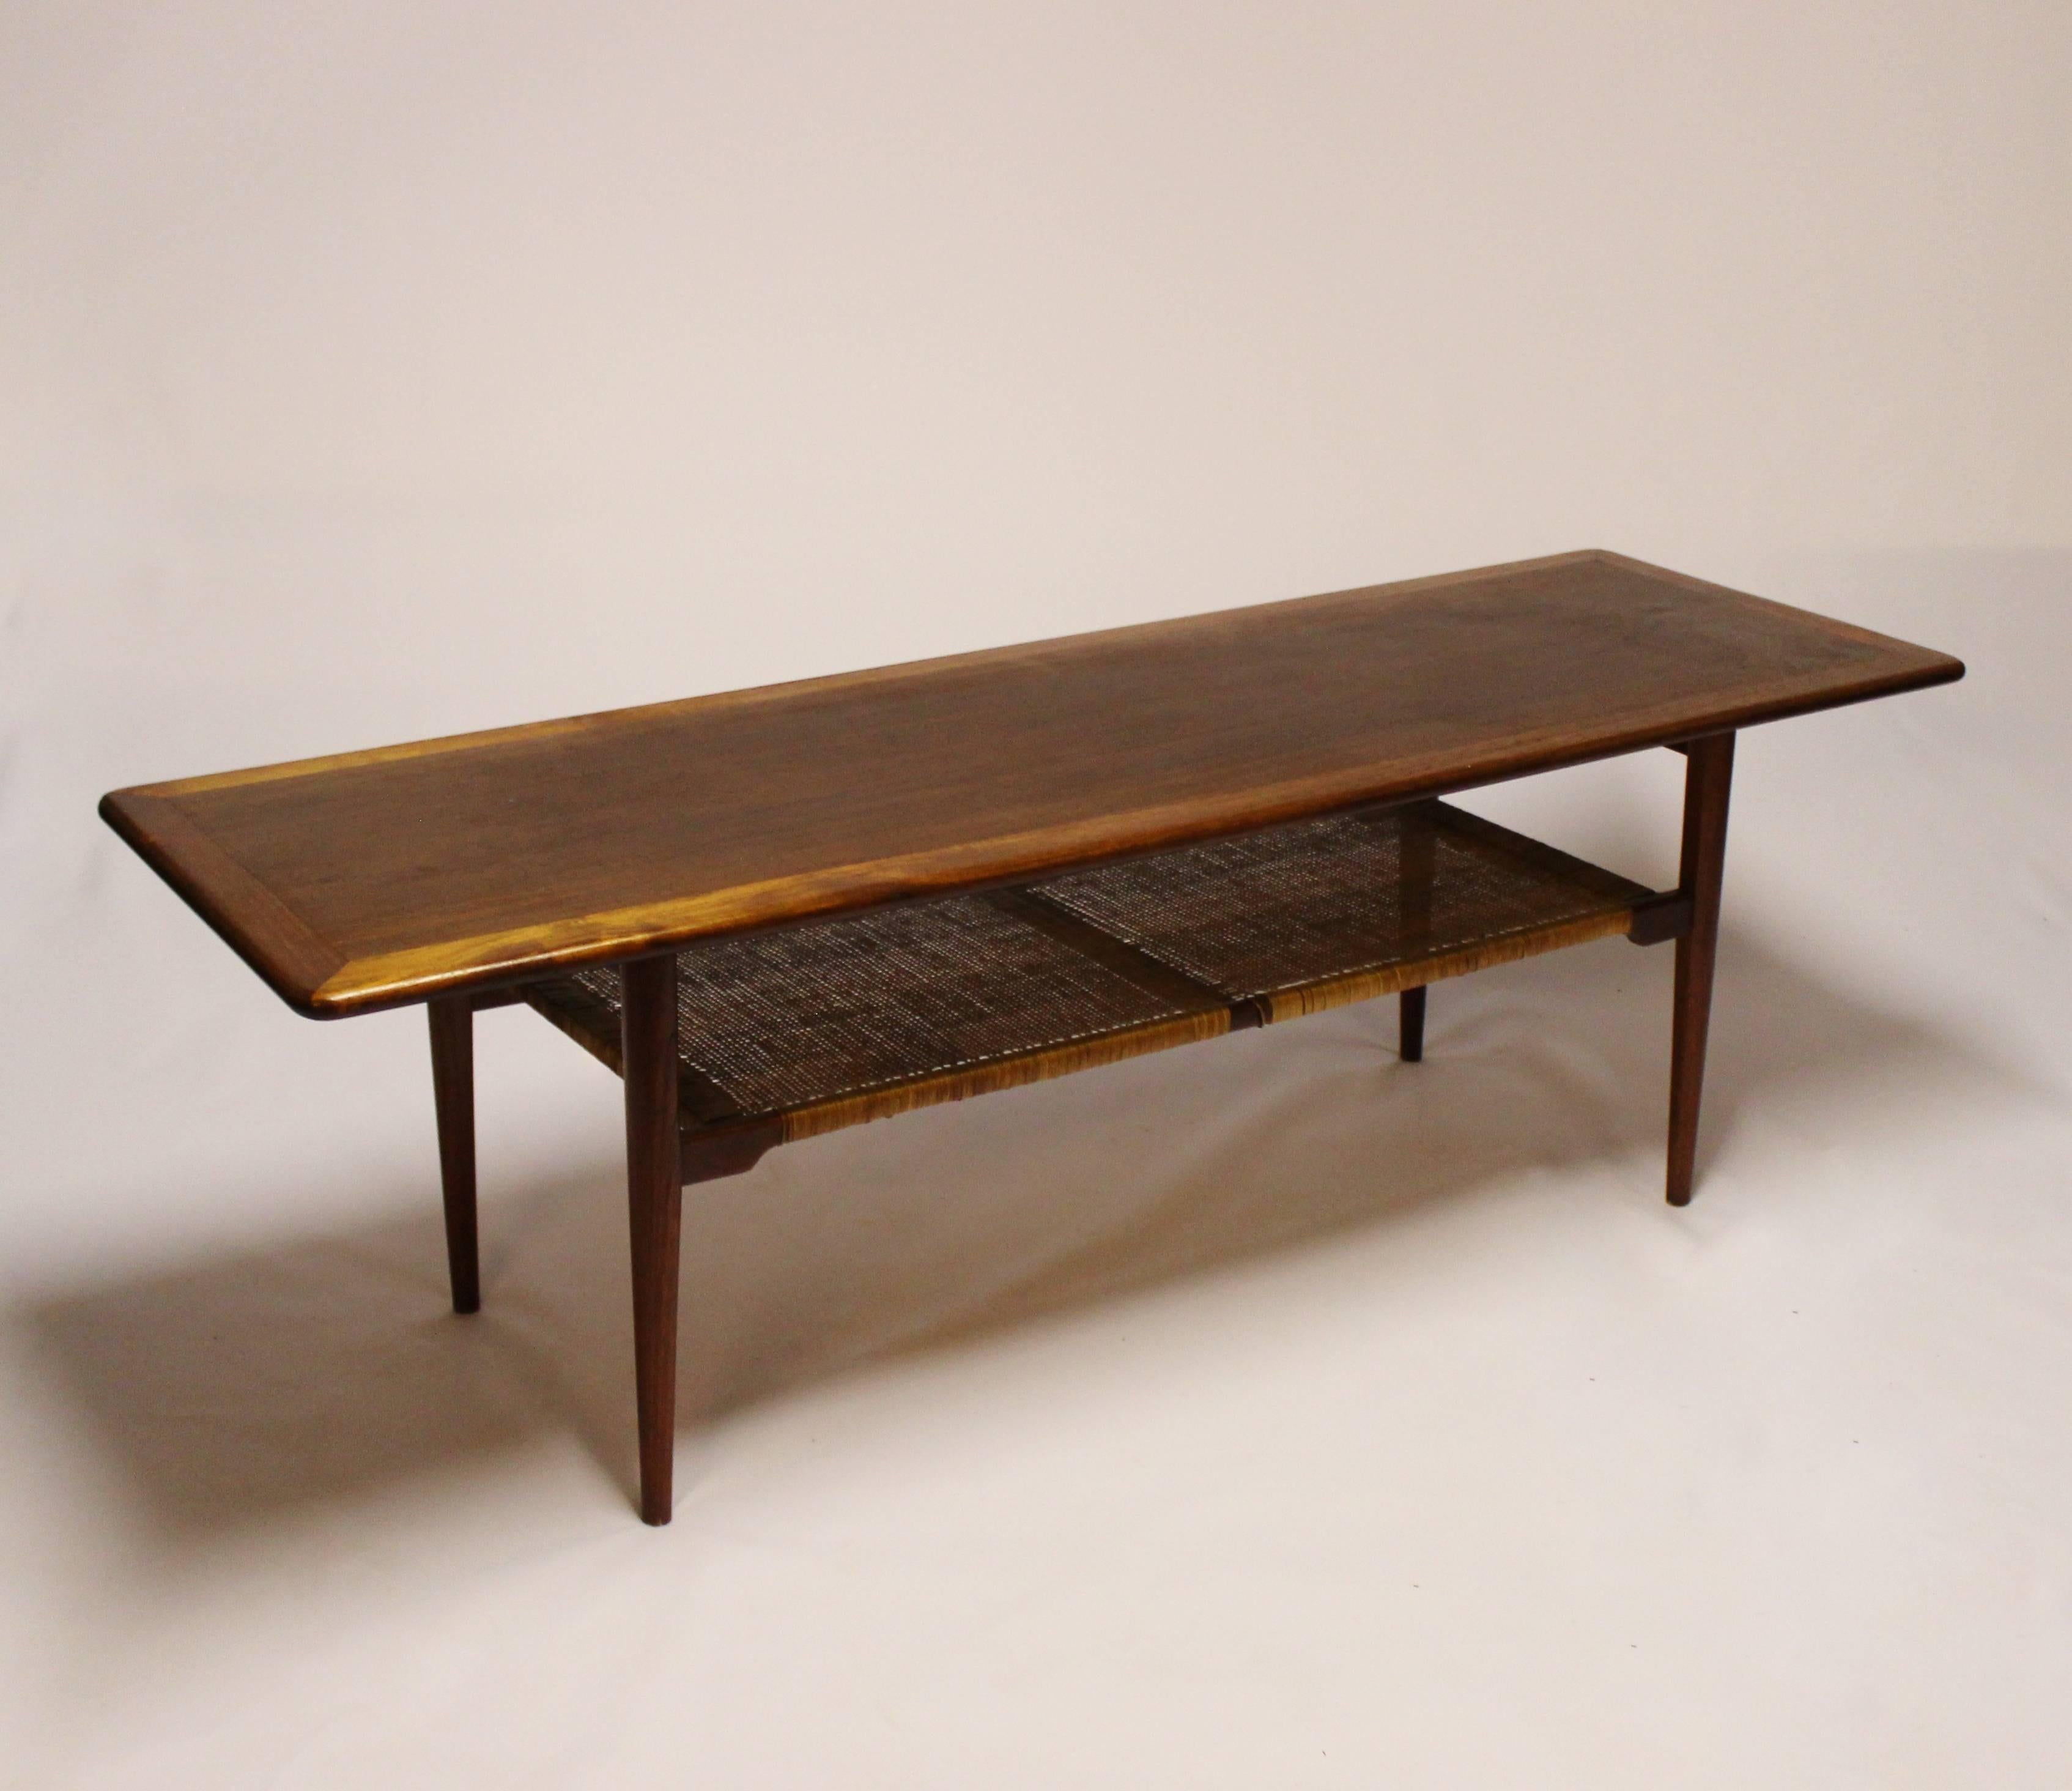 Coffee table in teak with paper cord shelf of Danish design from the 1960s. The table is in great vintage condition.